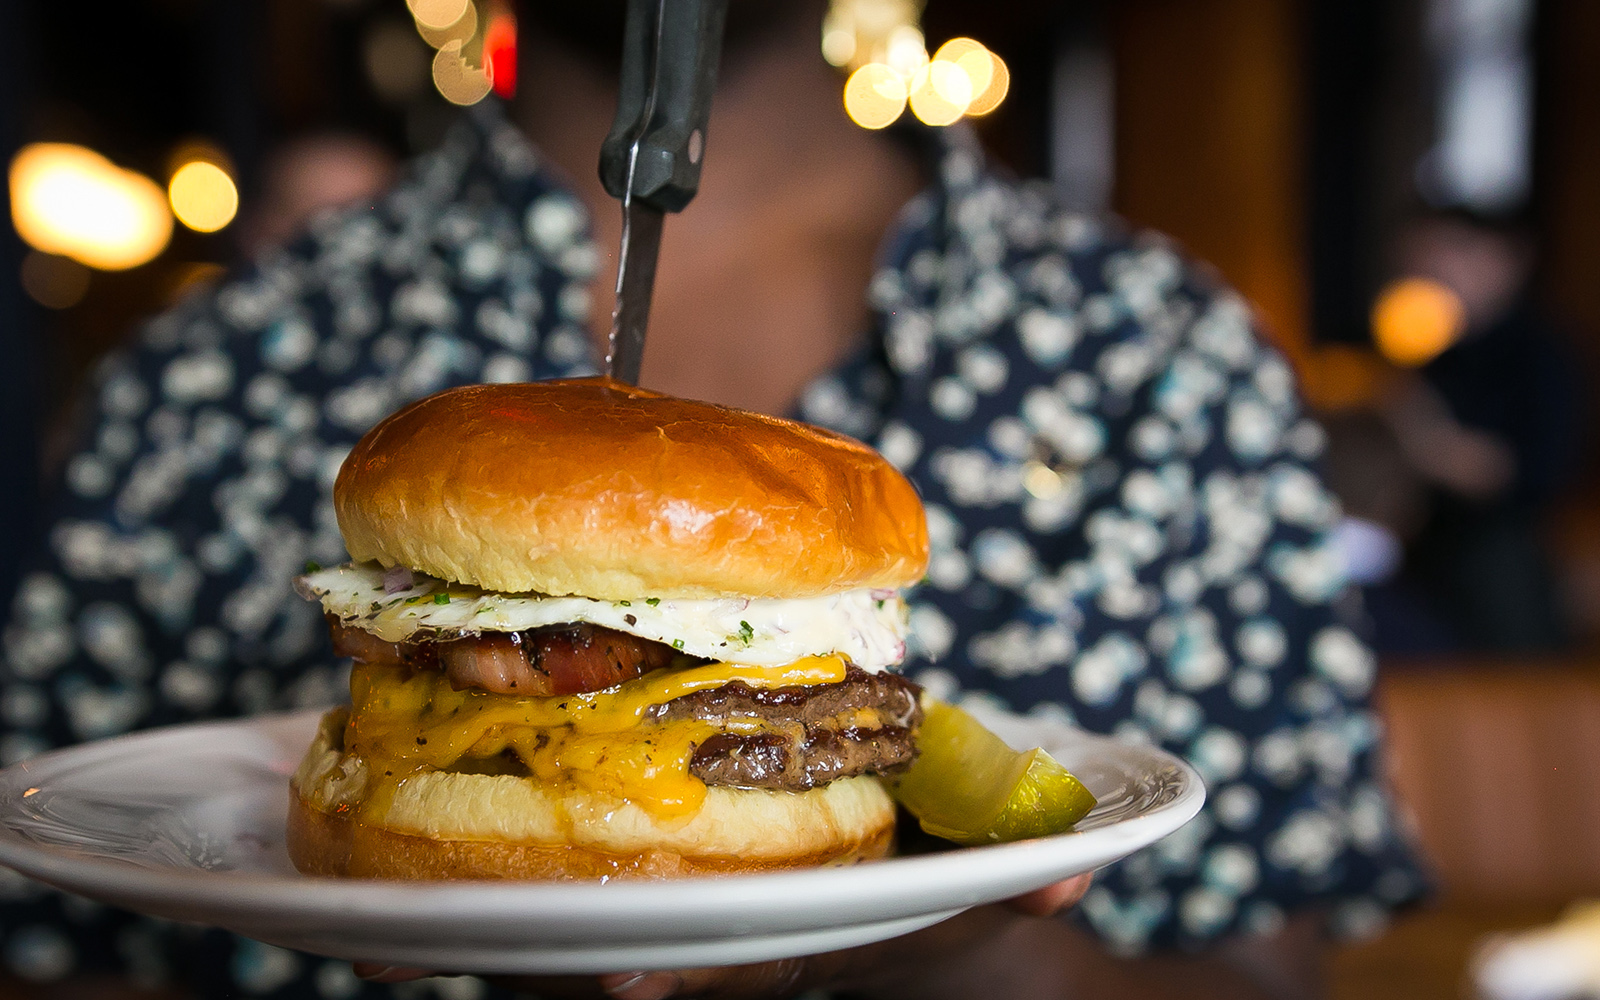 The Au Cheval burger with a fried egg and thick slab bacon